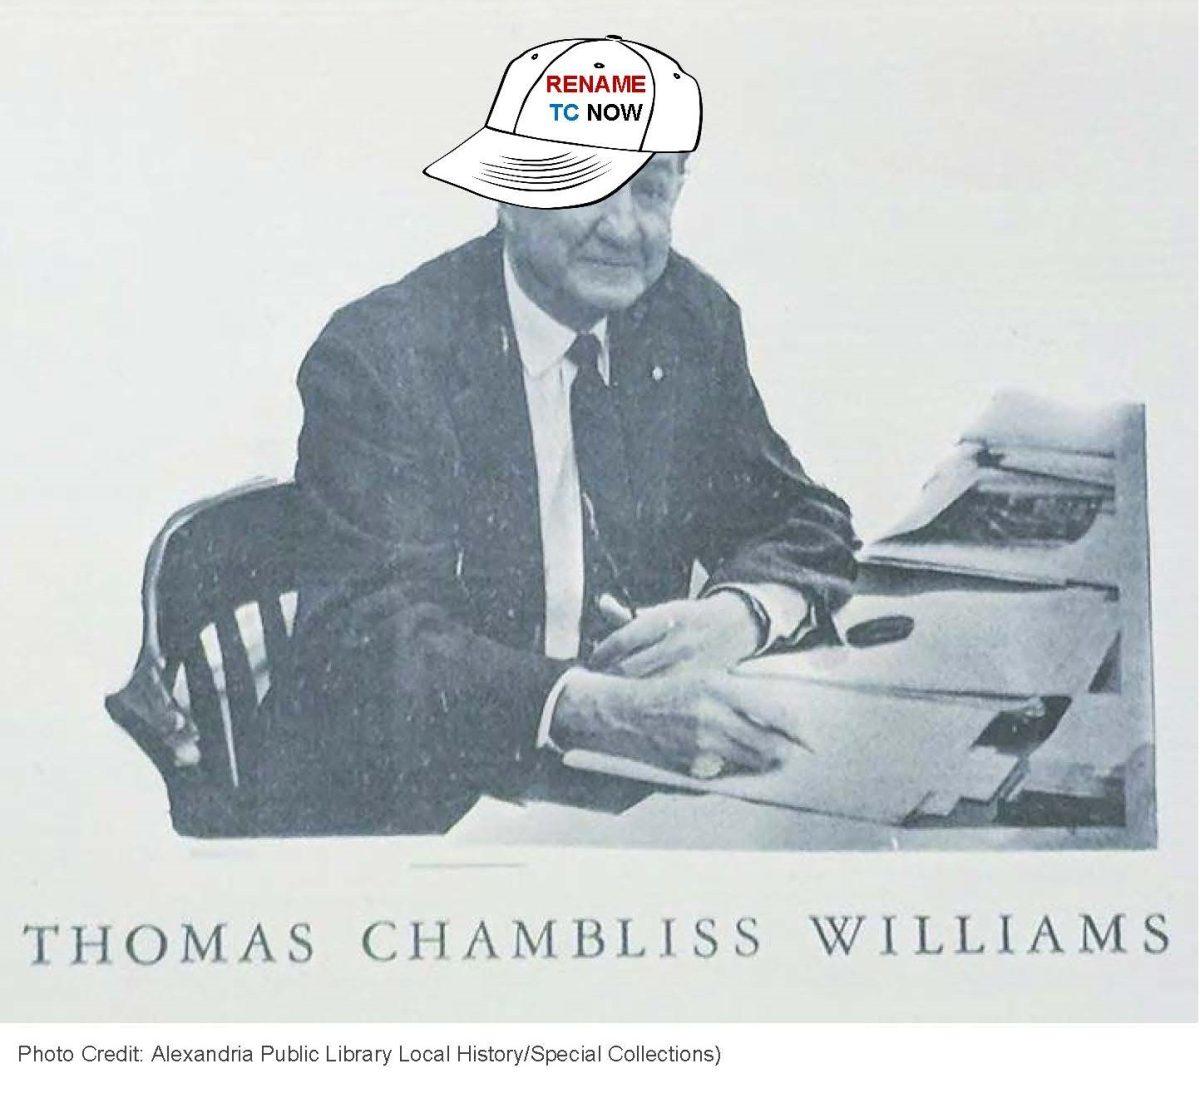 Thomas+Chambliss+Williams+Spearheads+Campaign+To+Remove+His+Name+From+High+School